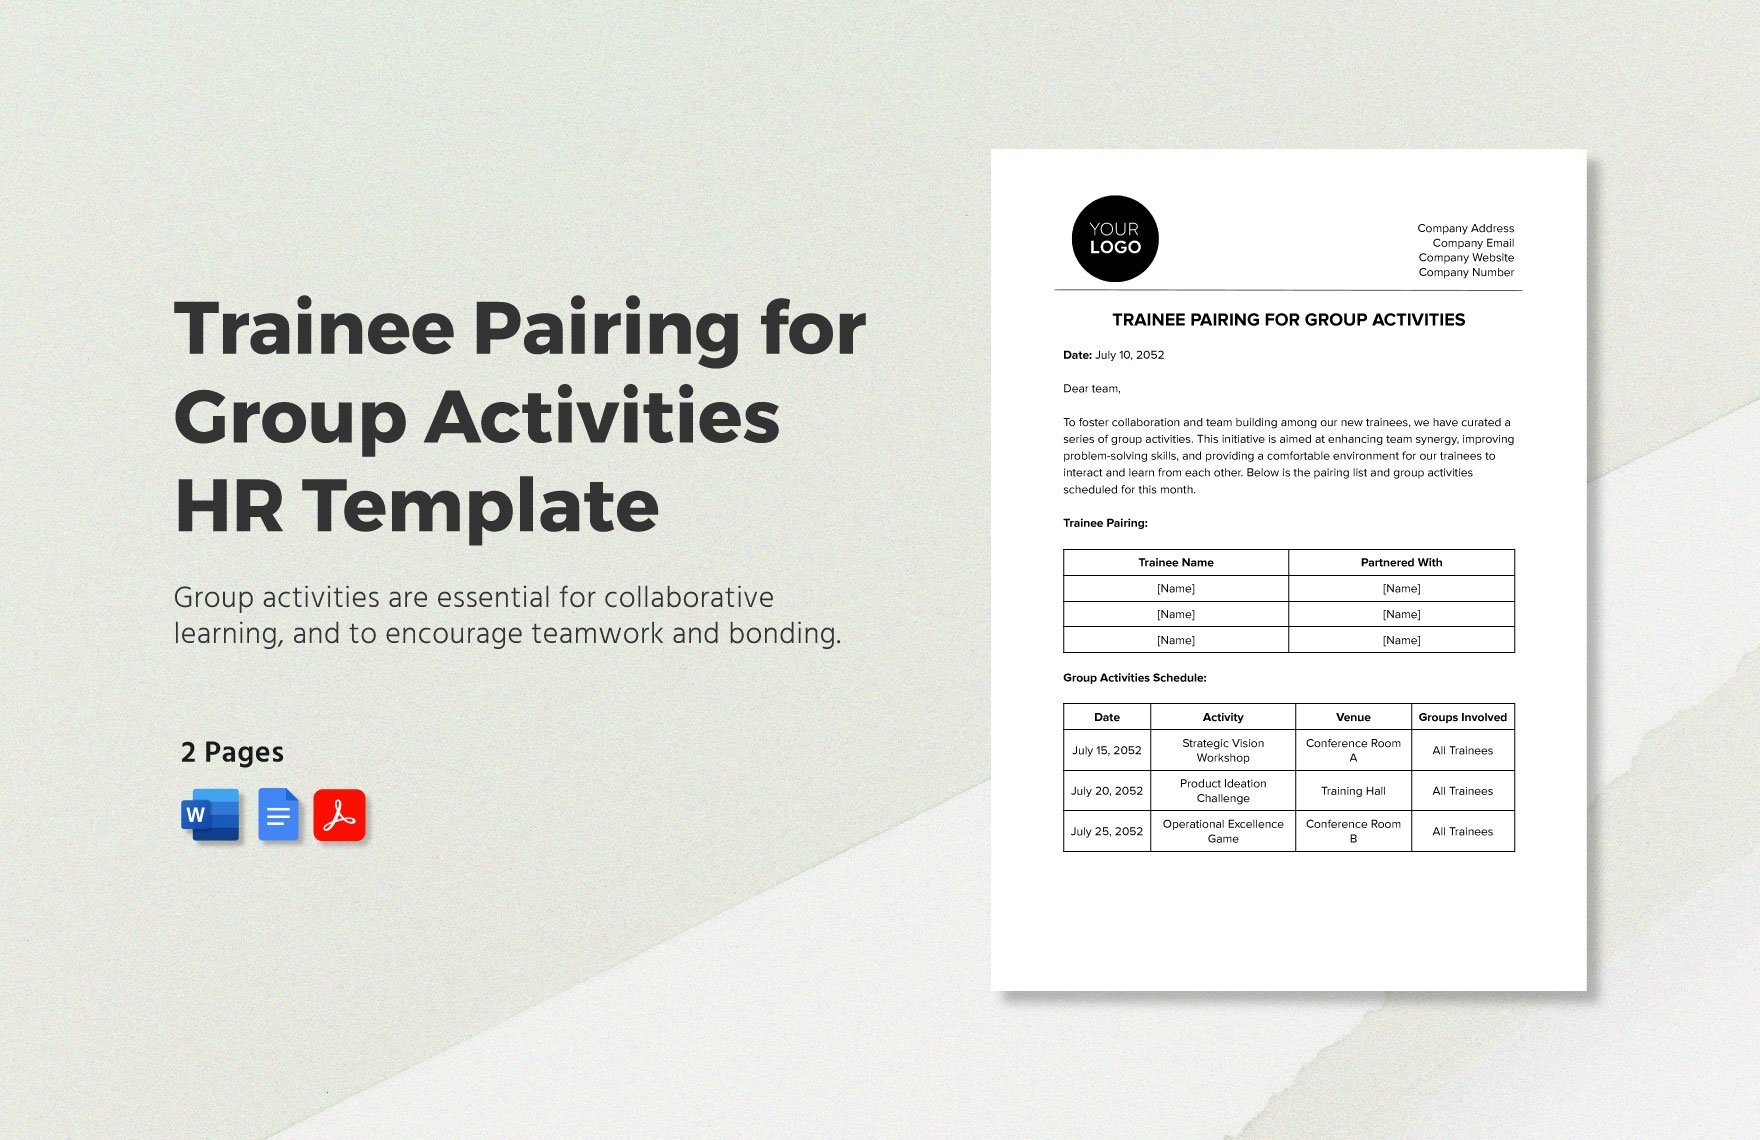 Trainee Pairing for Group Activities HR Template